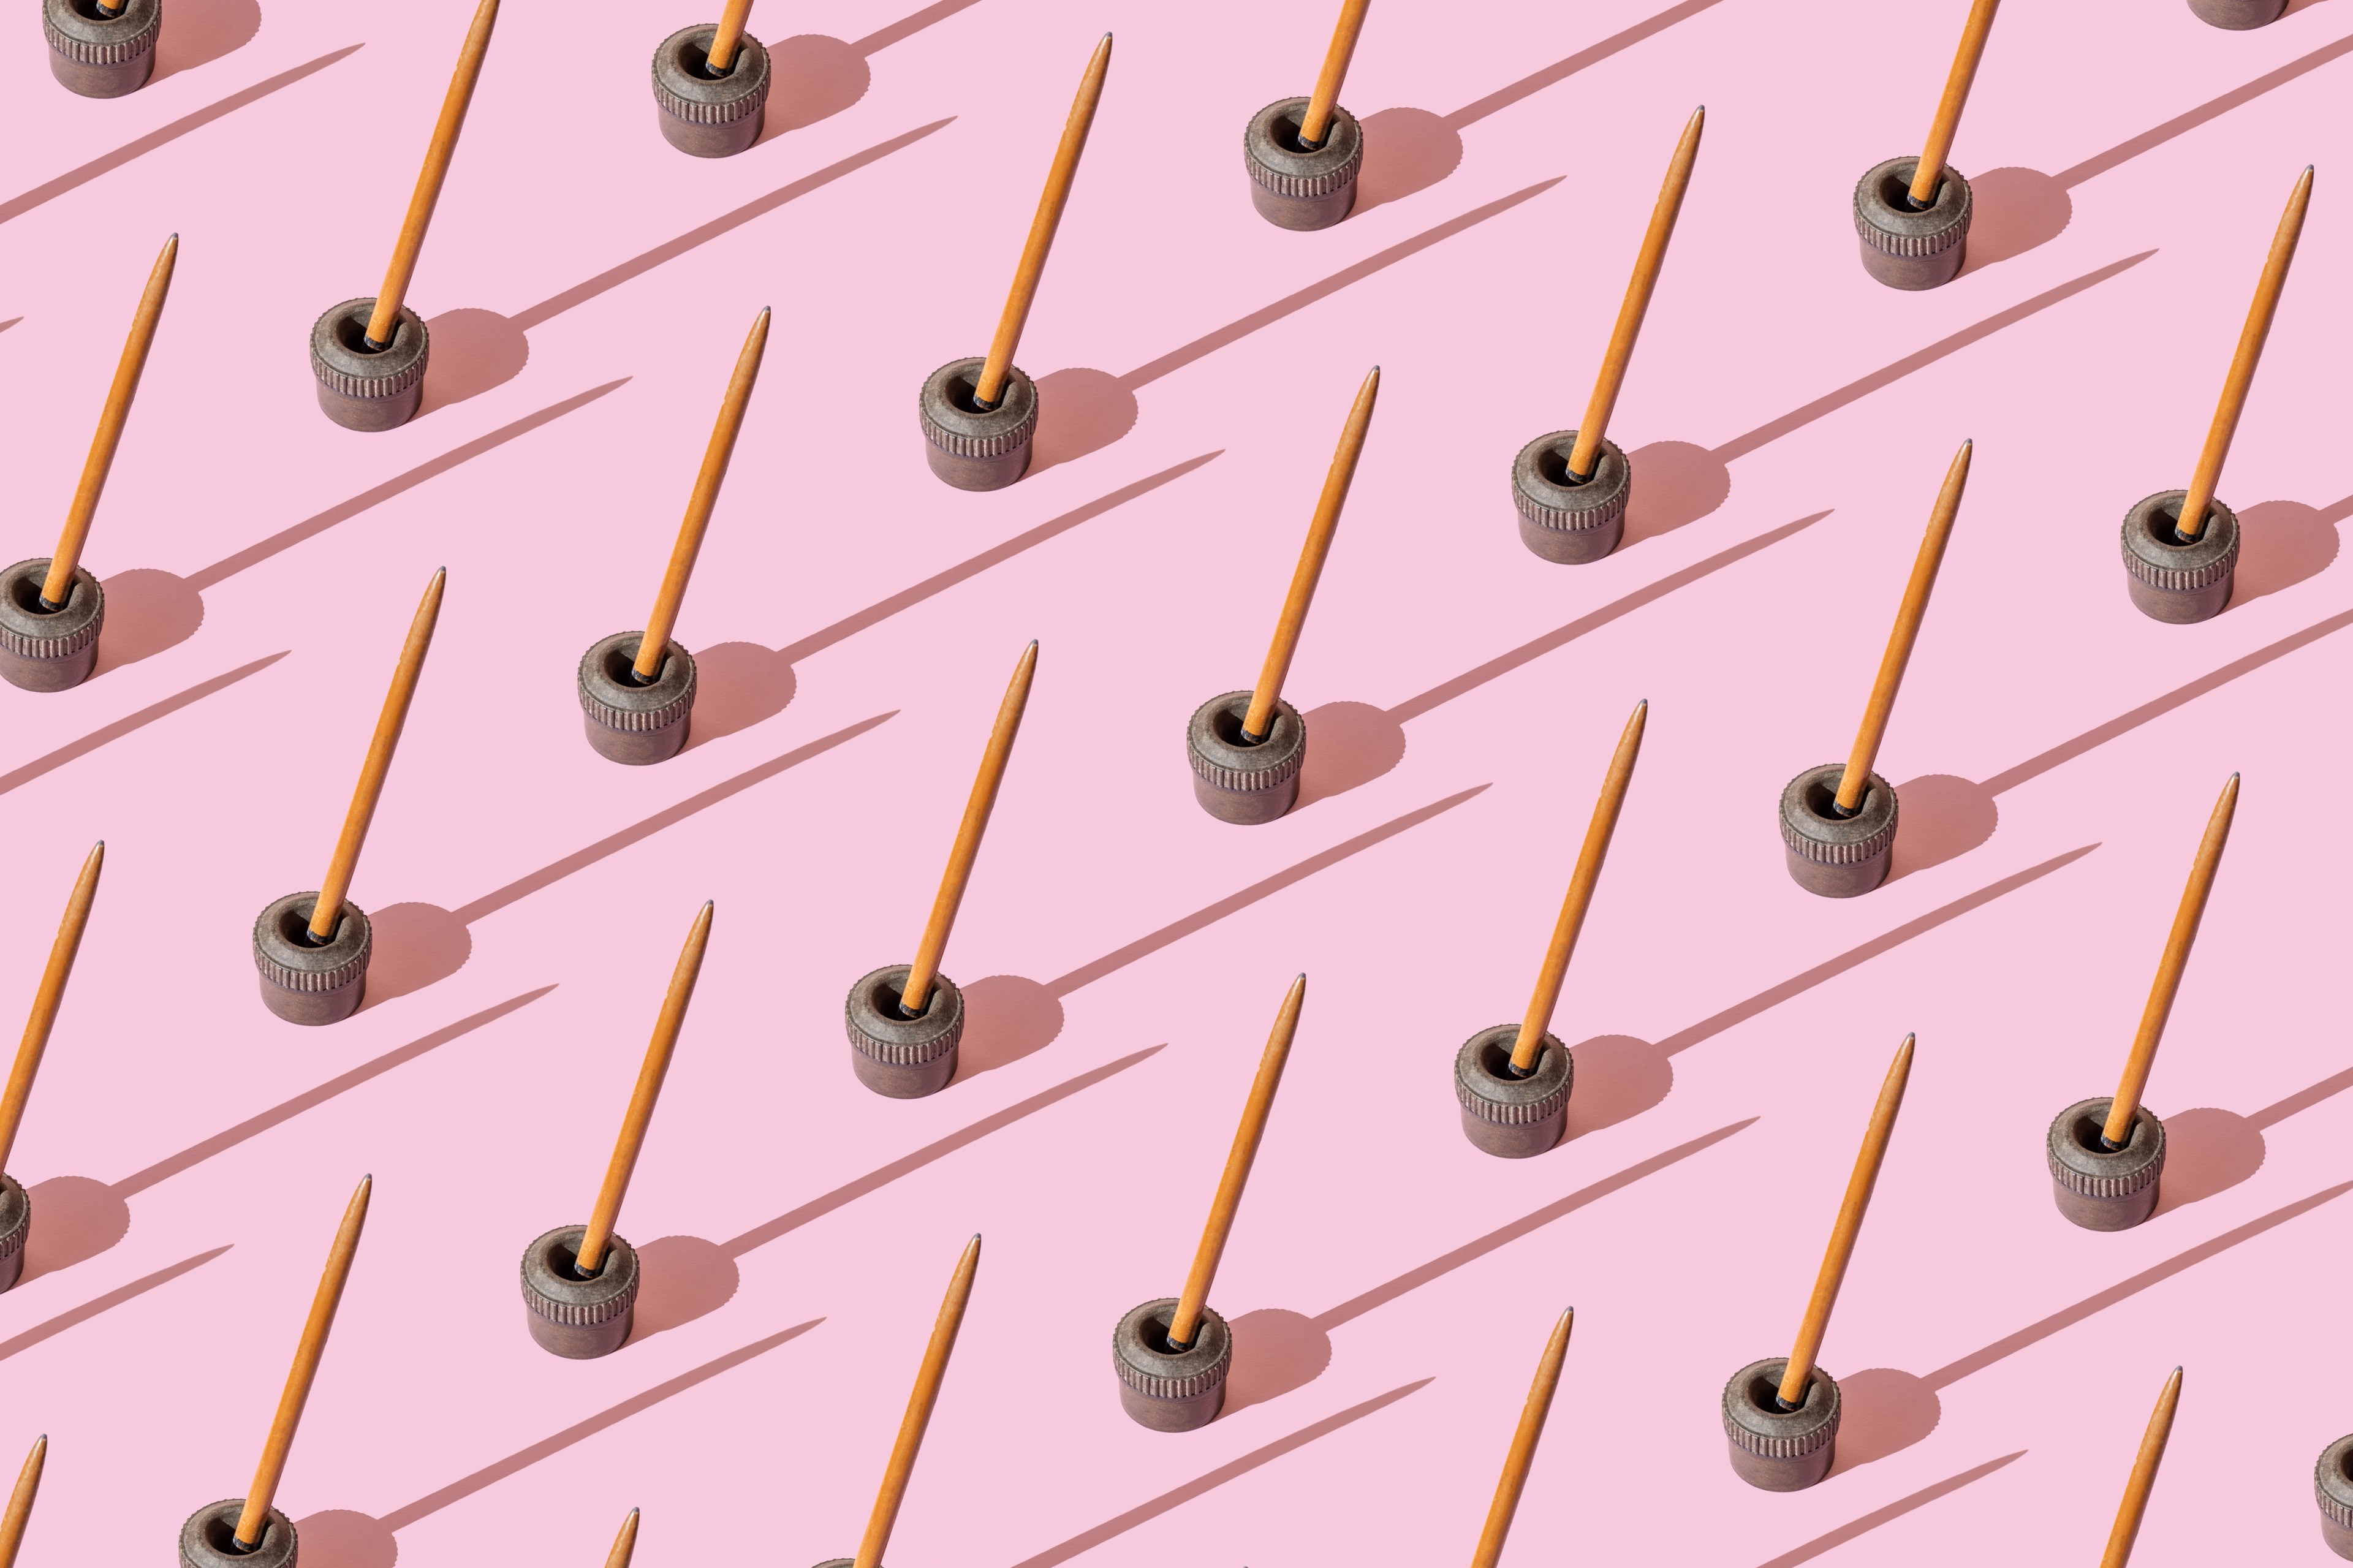 An illustration of repeated old, antique ink pen on the pink background